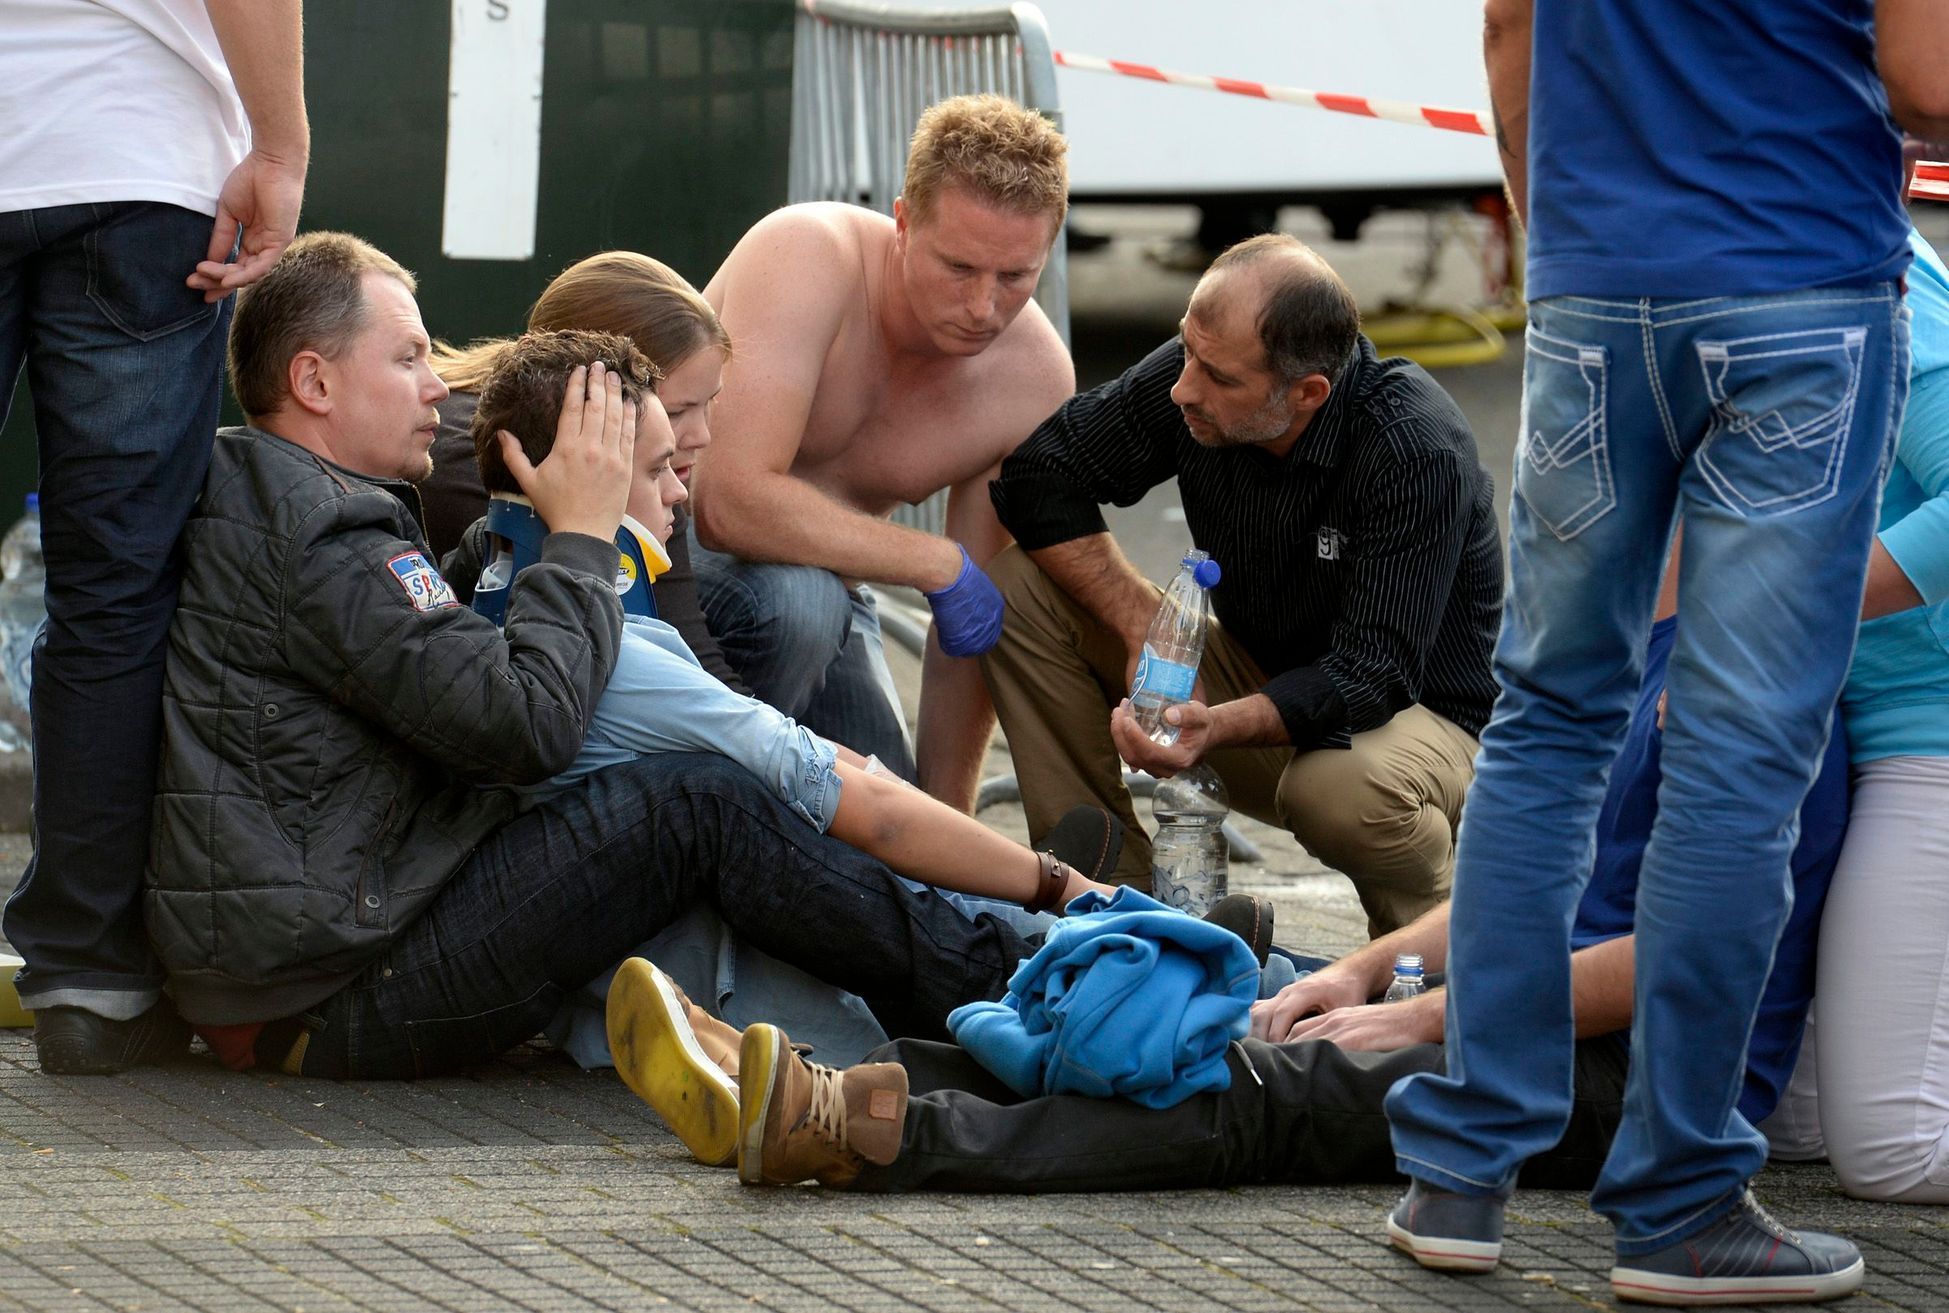 Paramedics attend to the wounded at a monster truck festival in Haaksbergen